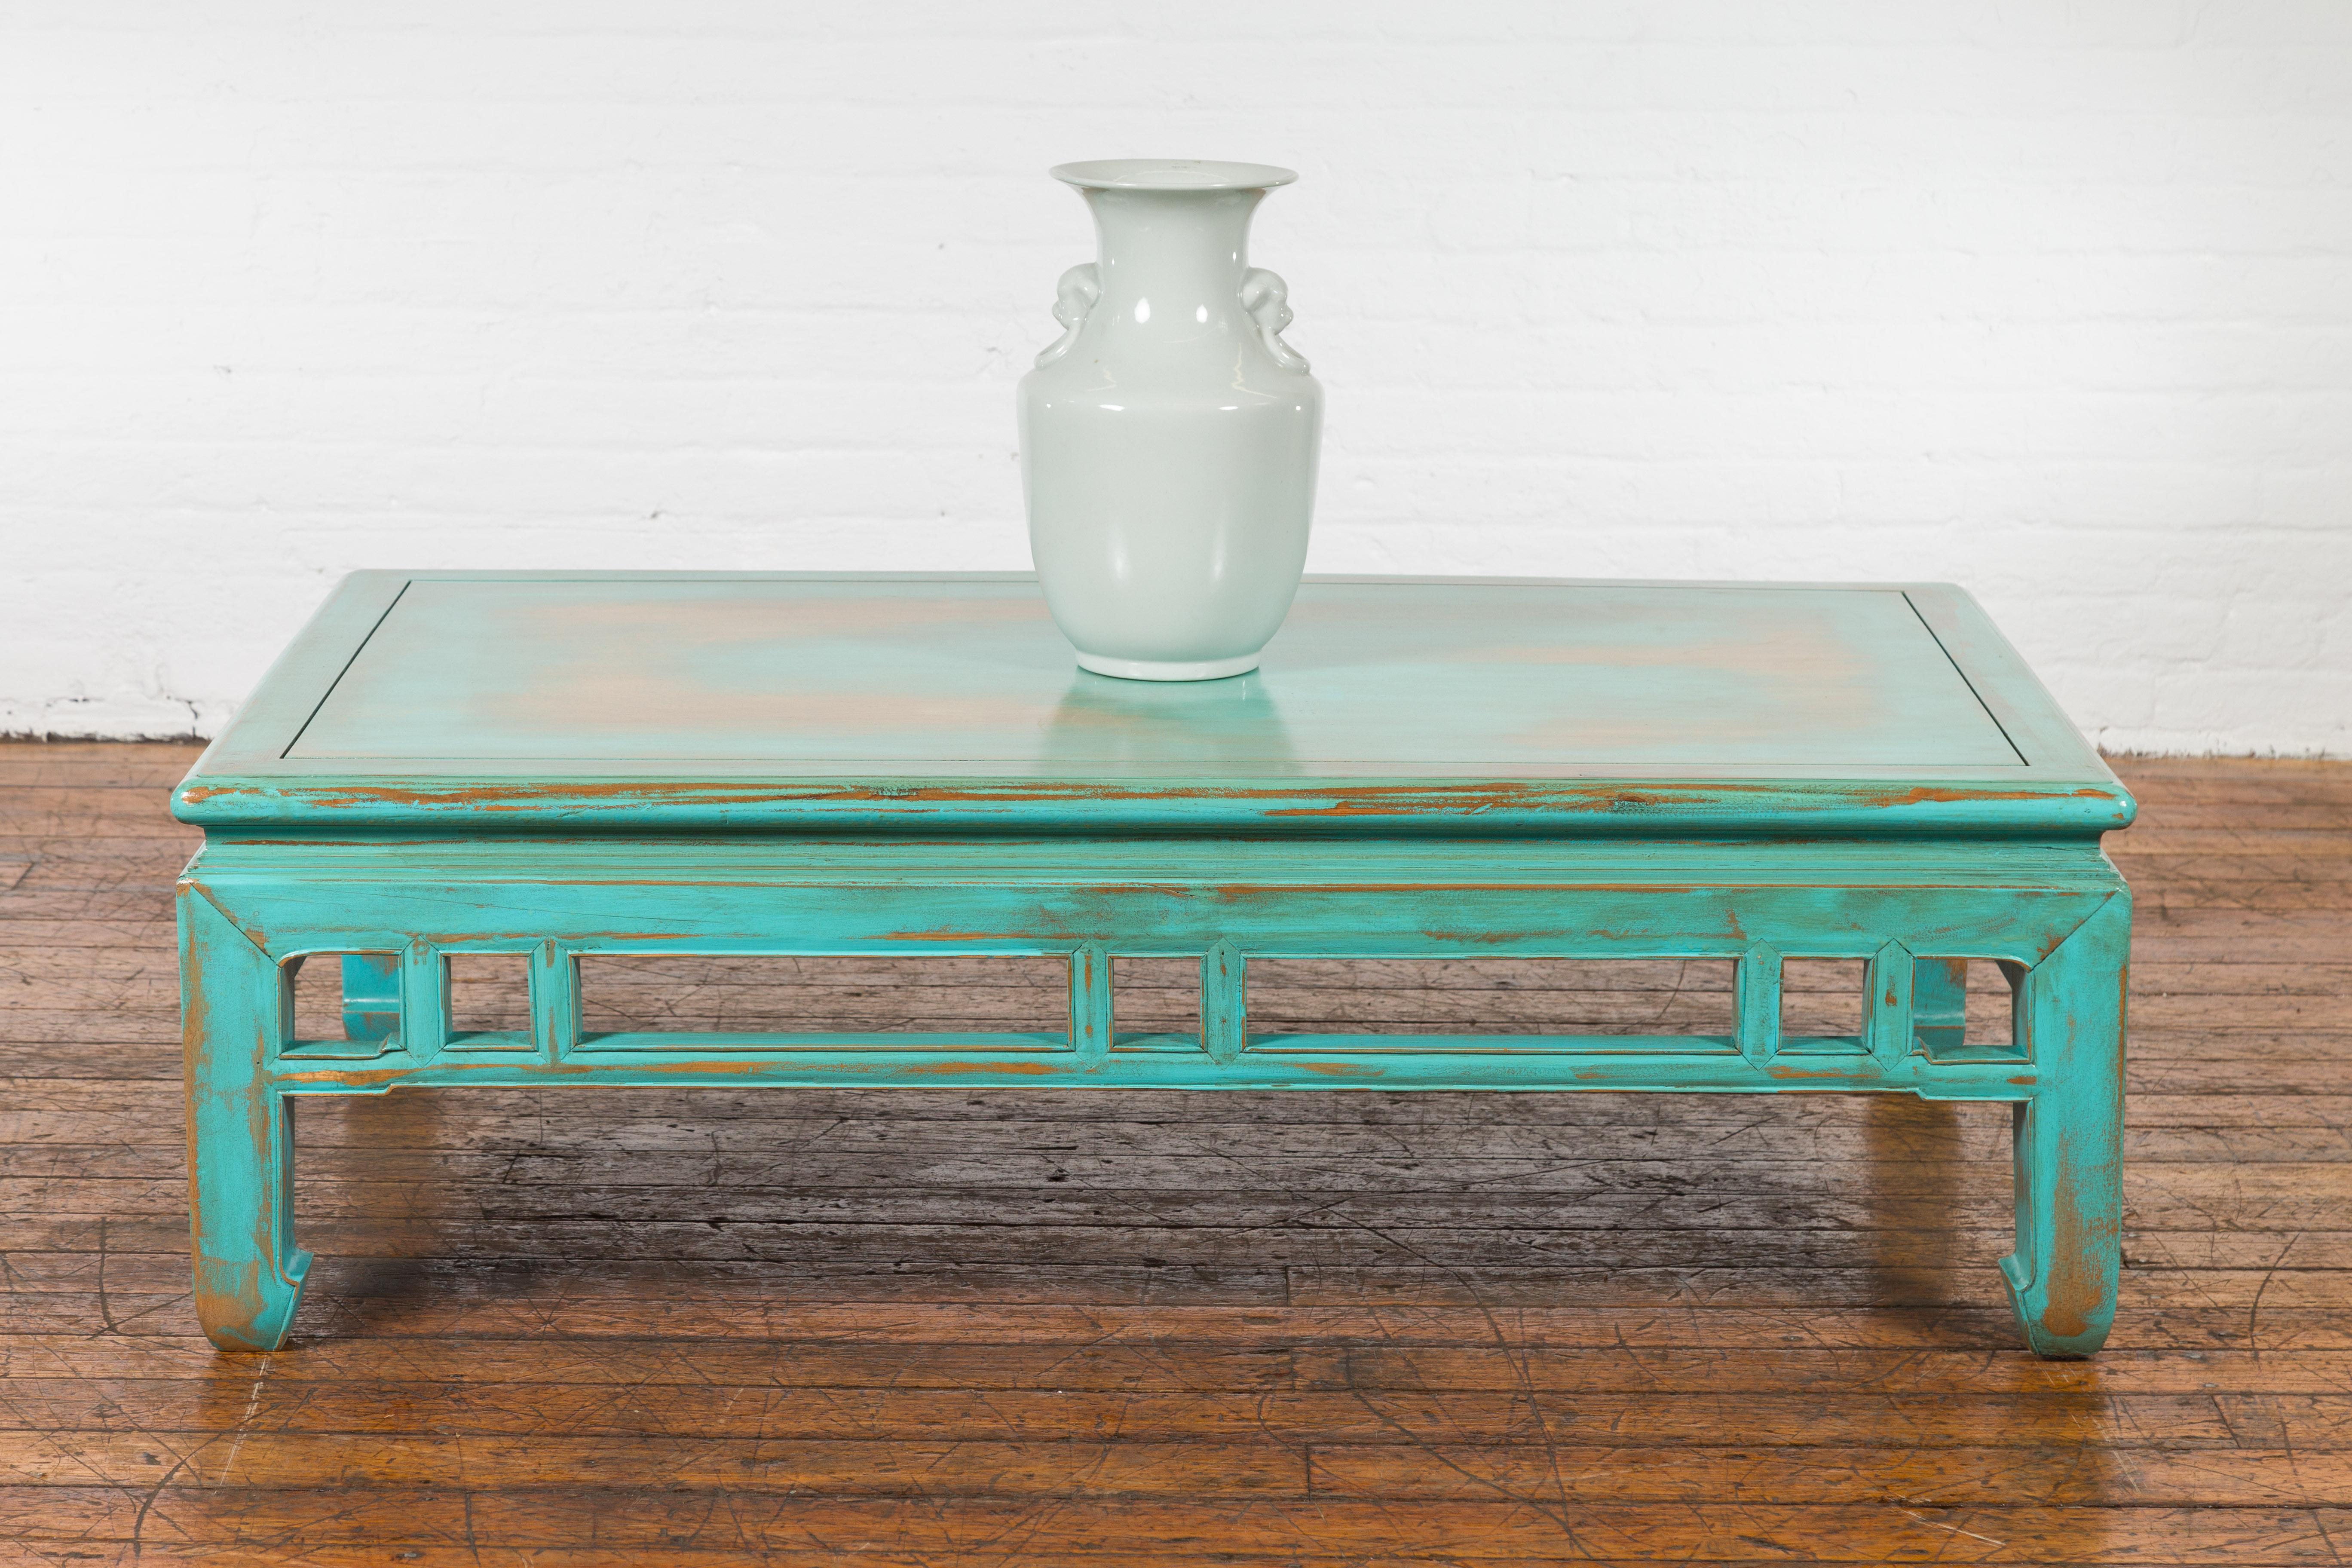 Carved Chinese Qing Dynasty Low Kang Coffee Table with Custom Aqua Teal Lacquer For Sale